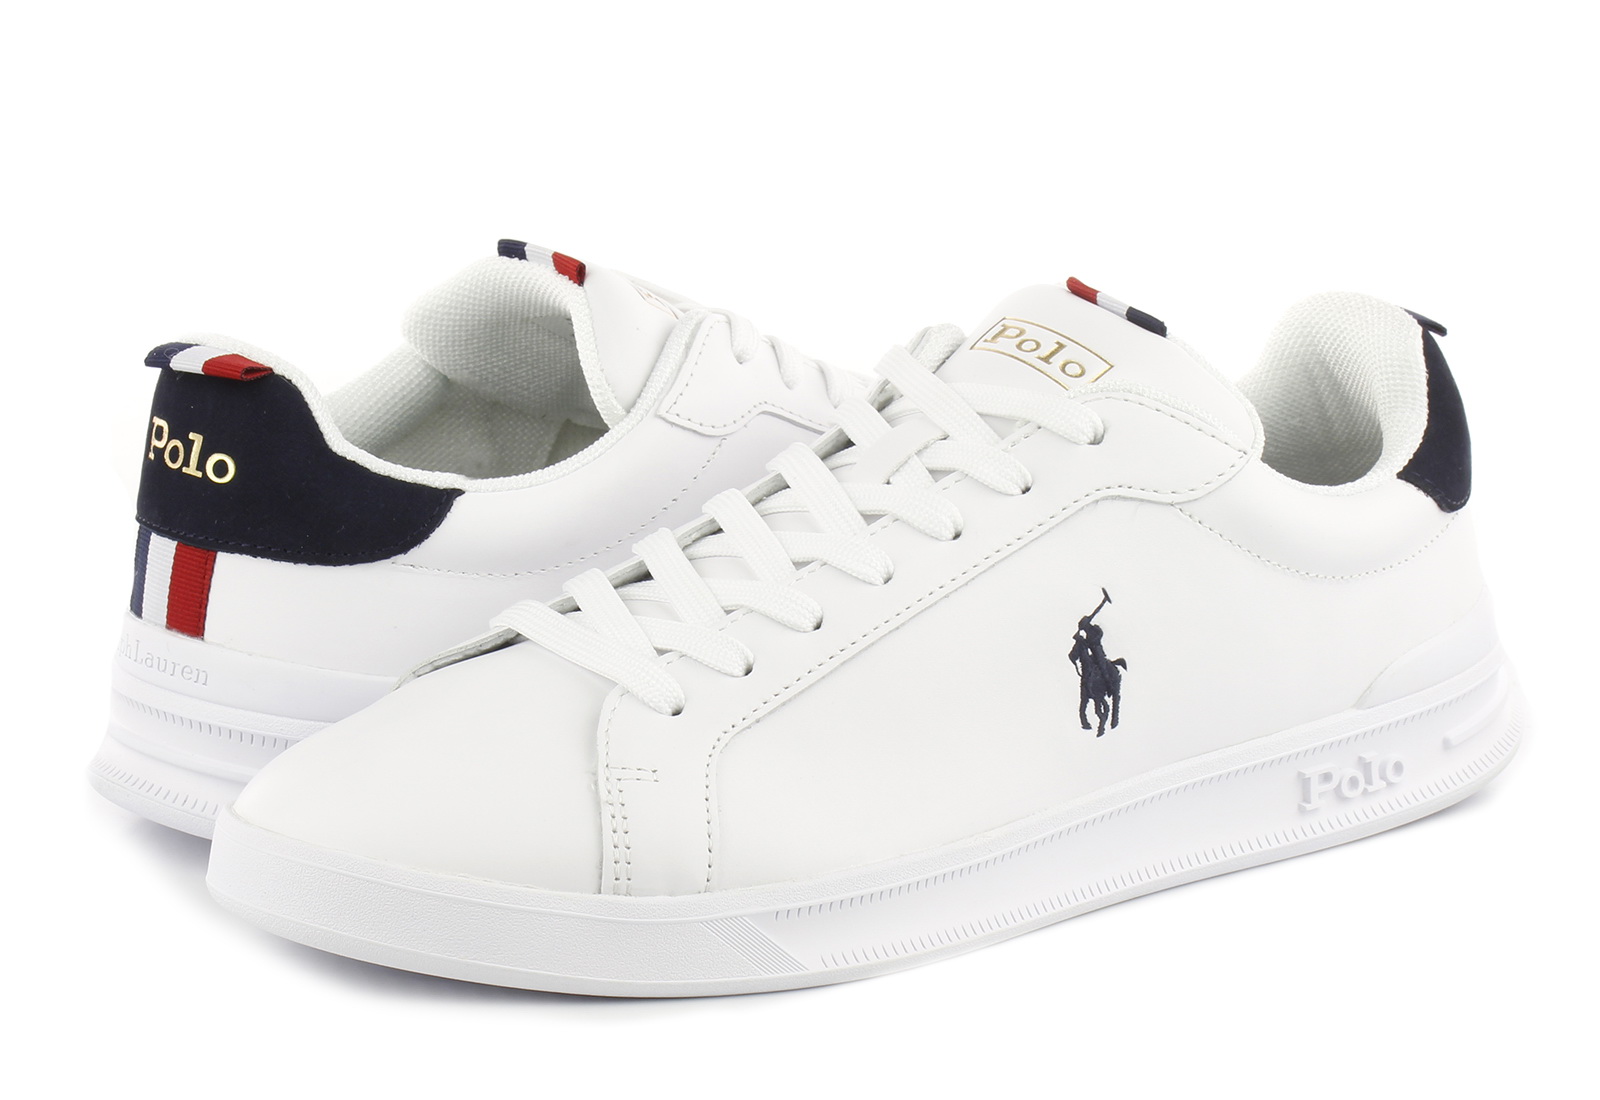 Polo Ralph Lauren Trainers - Heritage Court II - P809860883003 - Online  shop for sneakers, shoes and boots